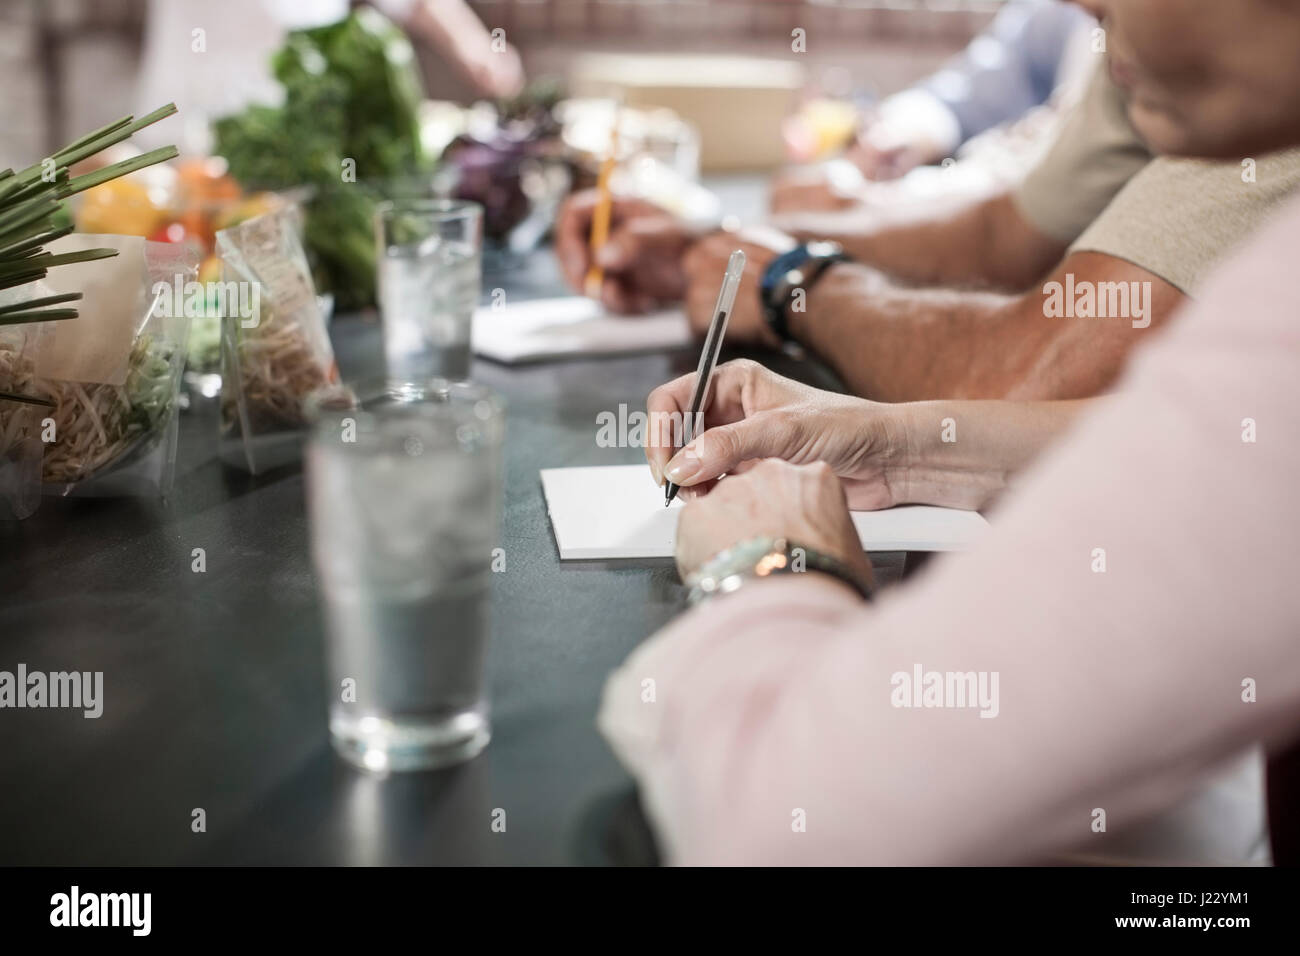 People writing down notes in cooking class Stock Photo